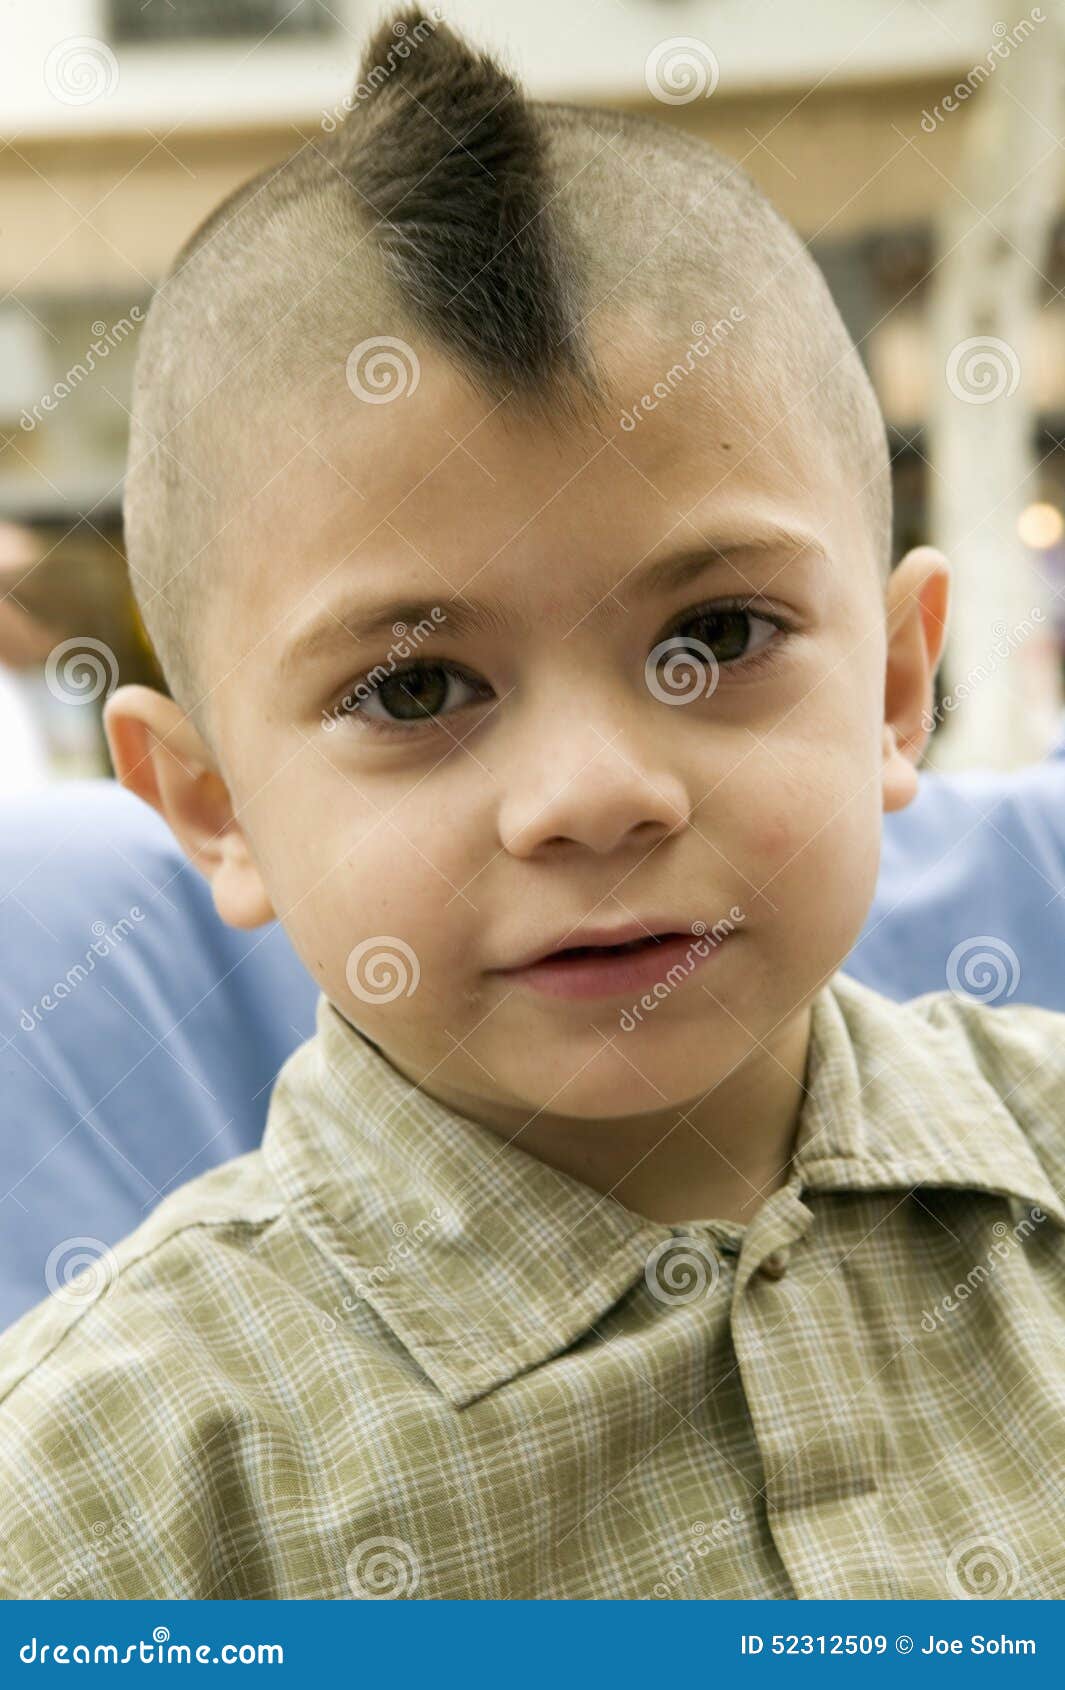 Young Boy With Mohawk Haircut Looks In Camera In Santa Barbara, CA Editorial Stock Image - Image ...